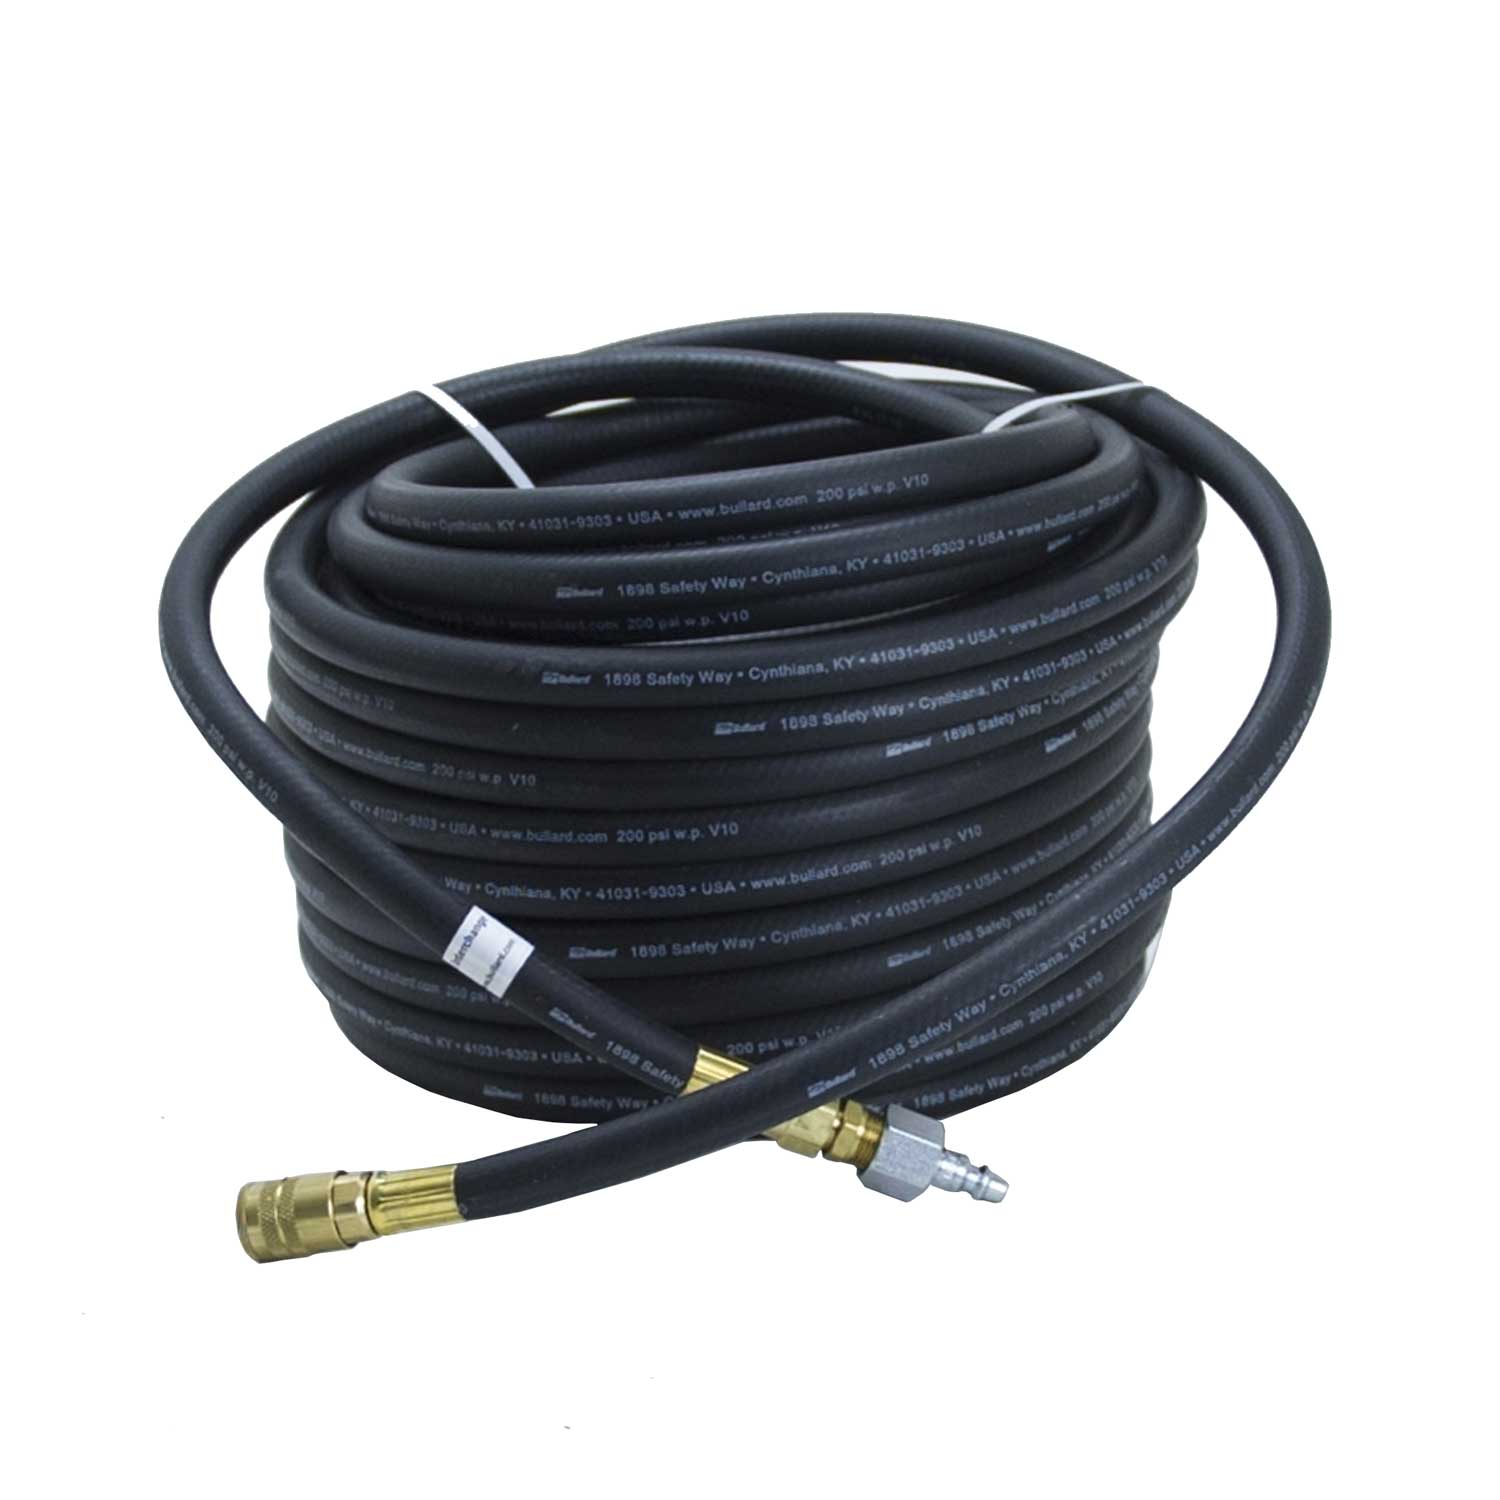 4696 - Air Supply Hose V10 3/8"ID 25 ft. (use for compressed air) - PURspray